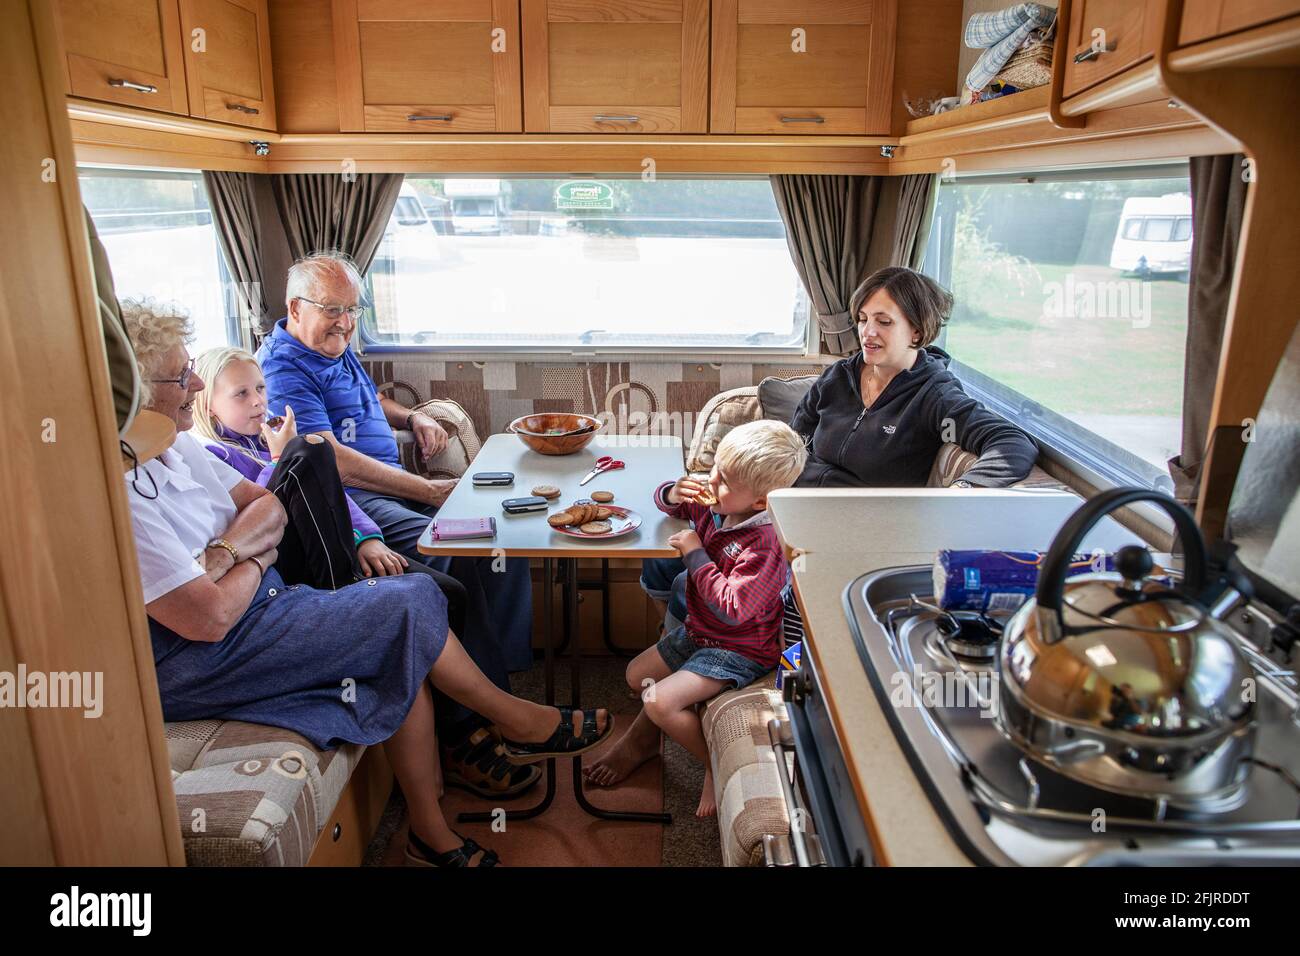 Family together on a caravanning holiday in the United Kingdom Stock Photo